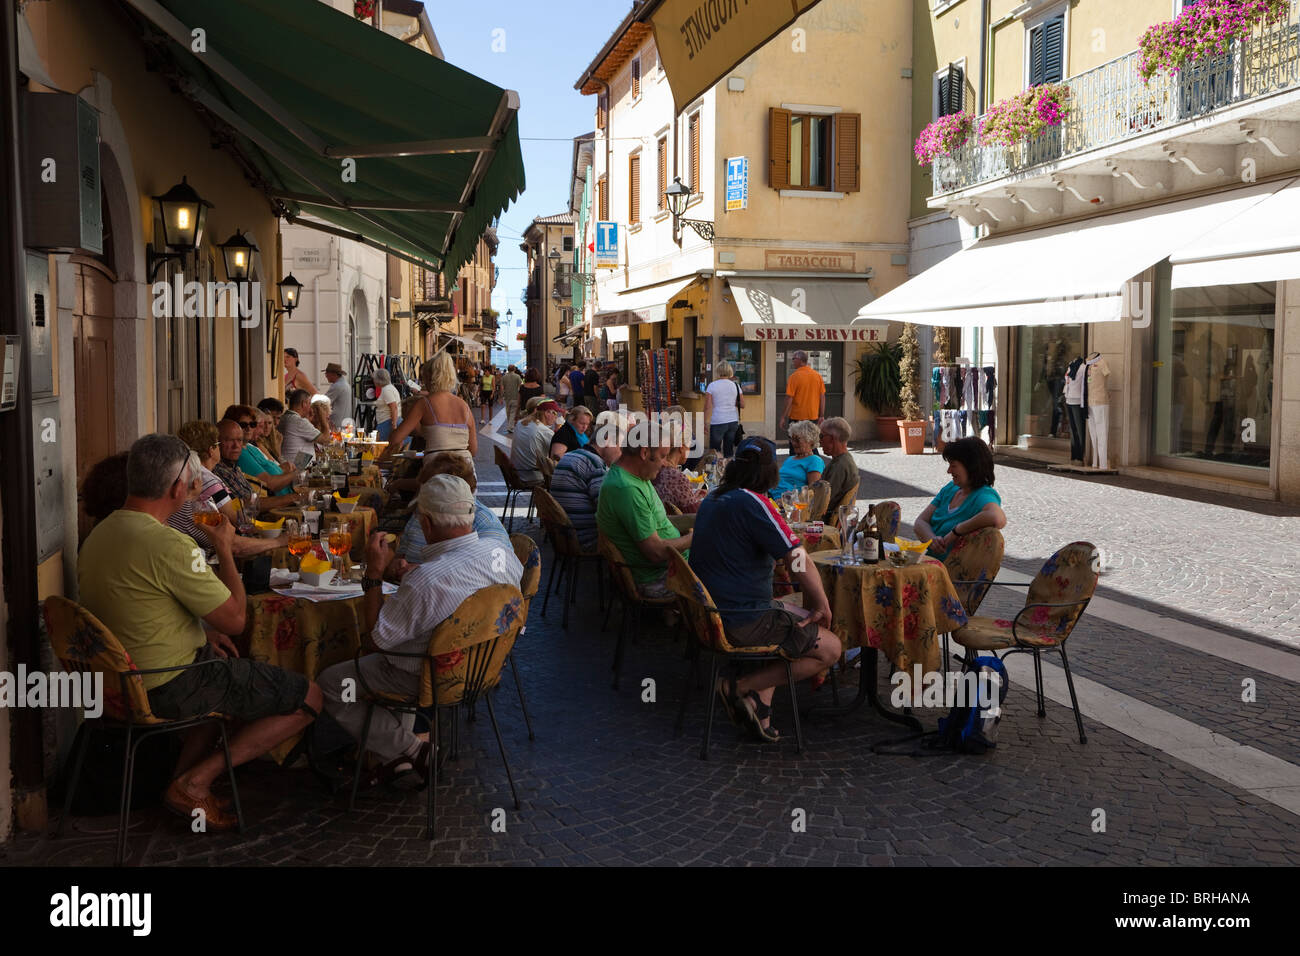 Bardolino Shop High Resolution Stock Photography and Images - Alamy